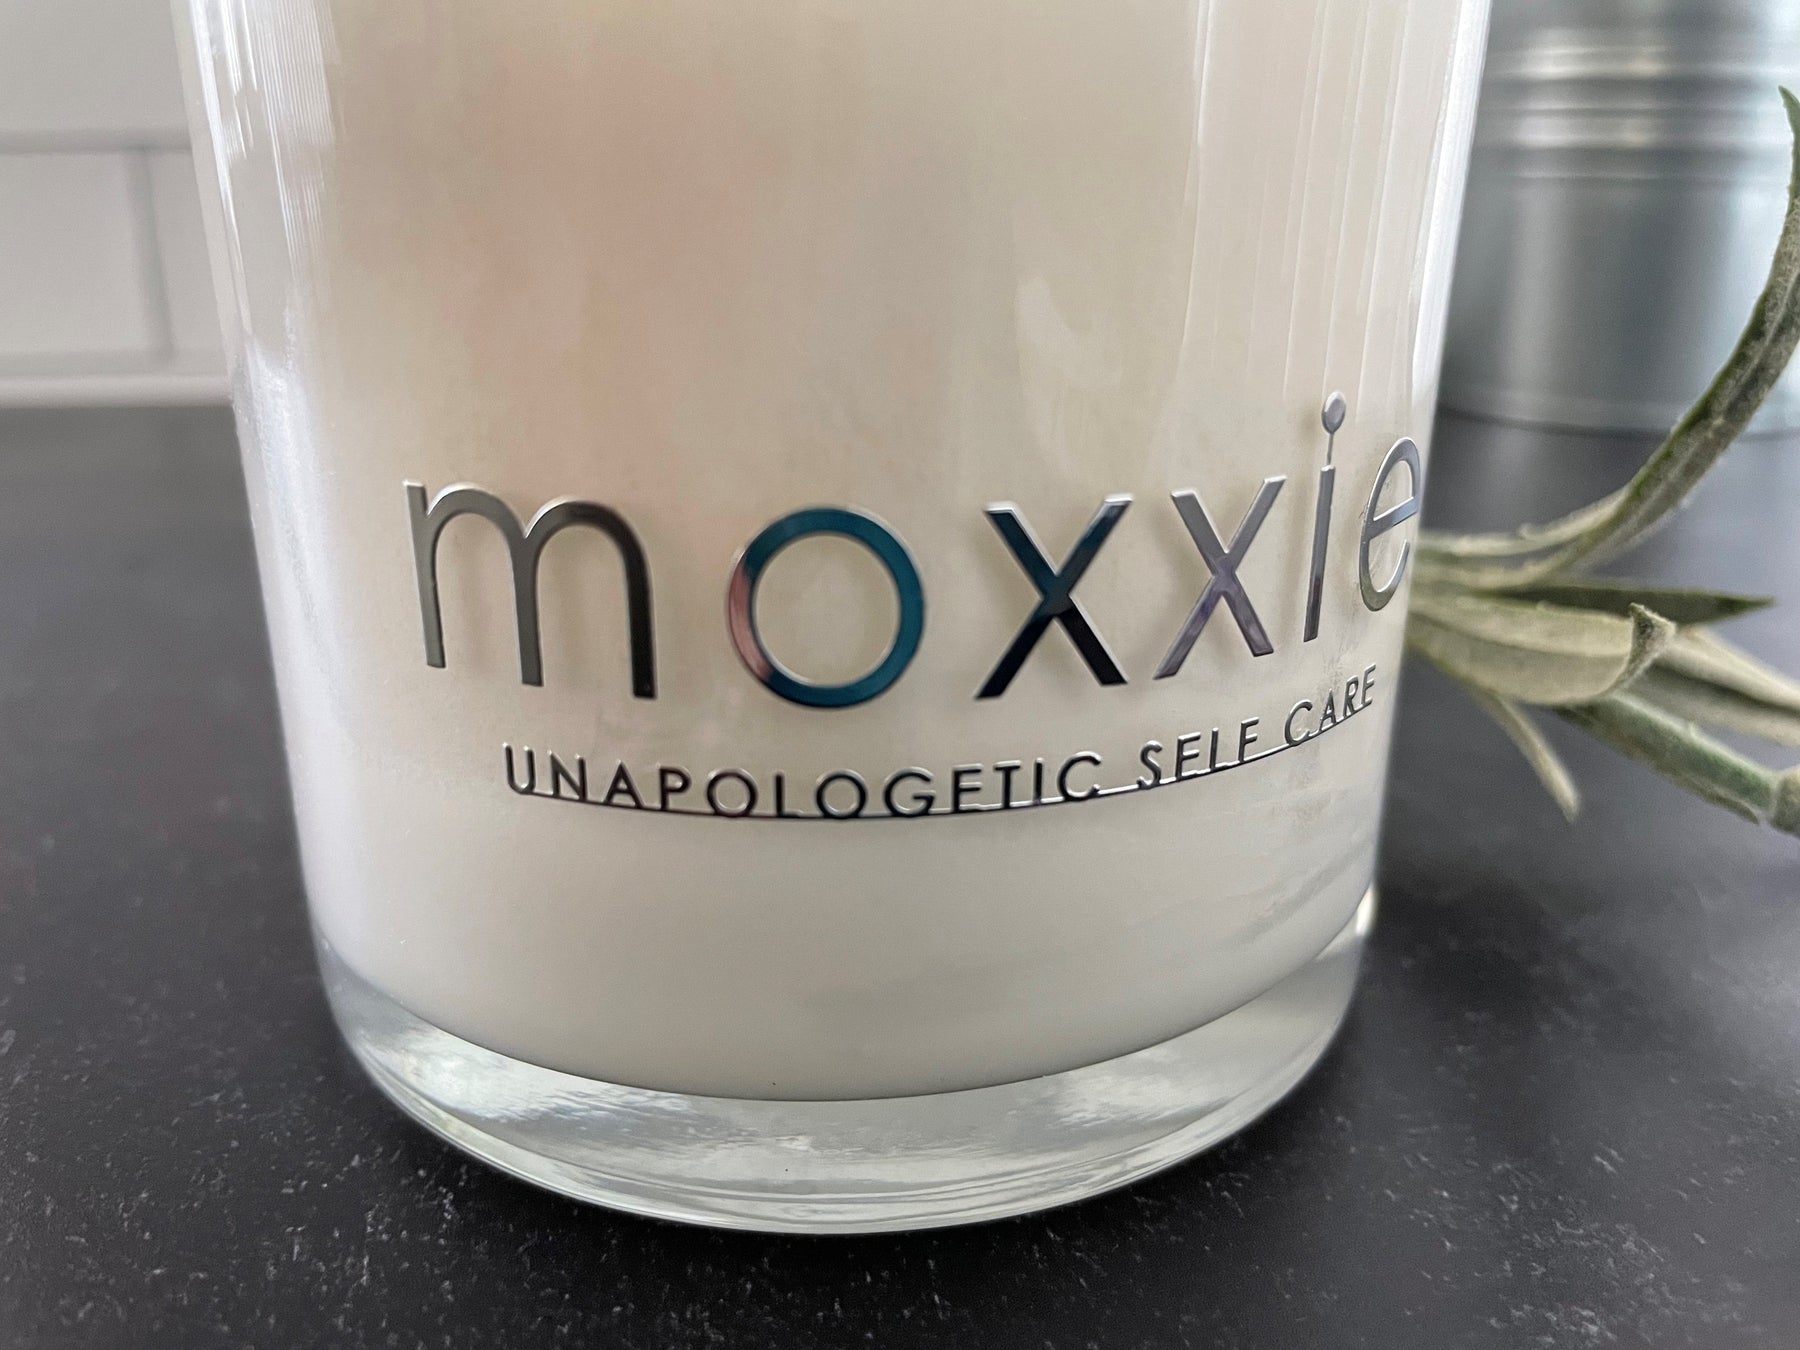 Moxxie Essential Care hand-poured candle made from 100% soy wax with a cotton fiber lead-free wick and honestly fragranced with a blend of pure essential oils. 